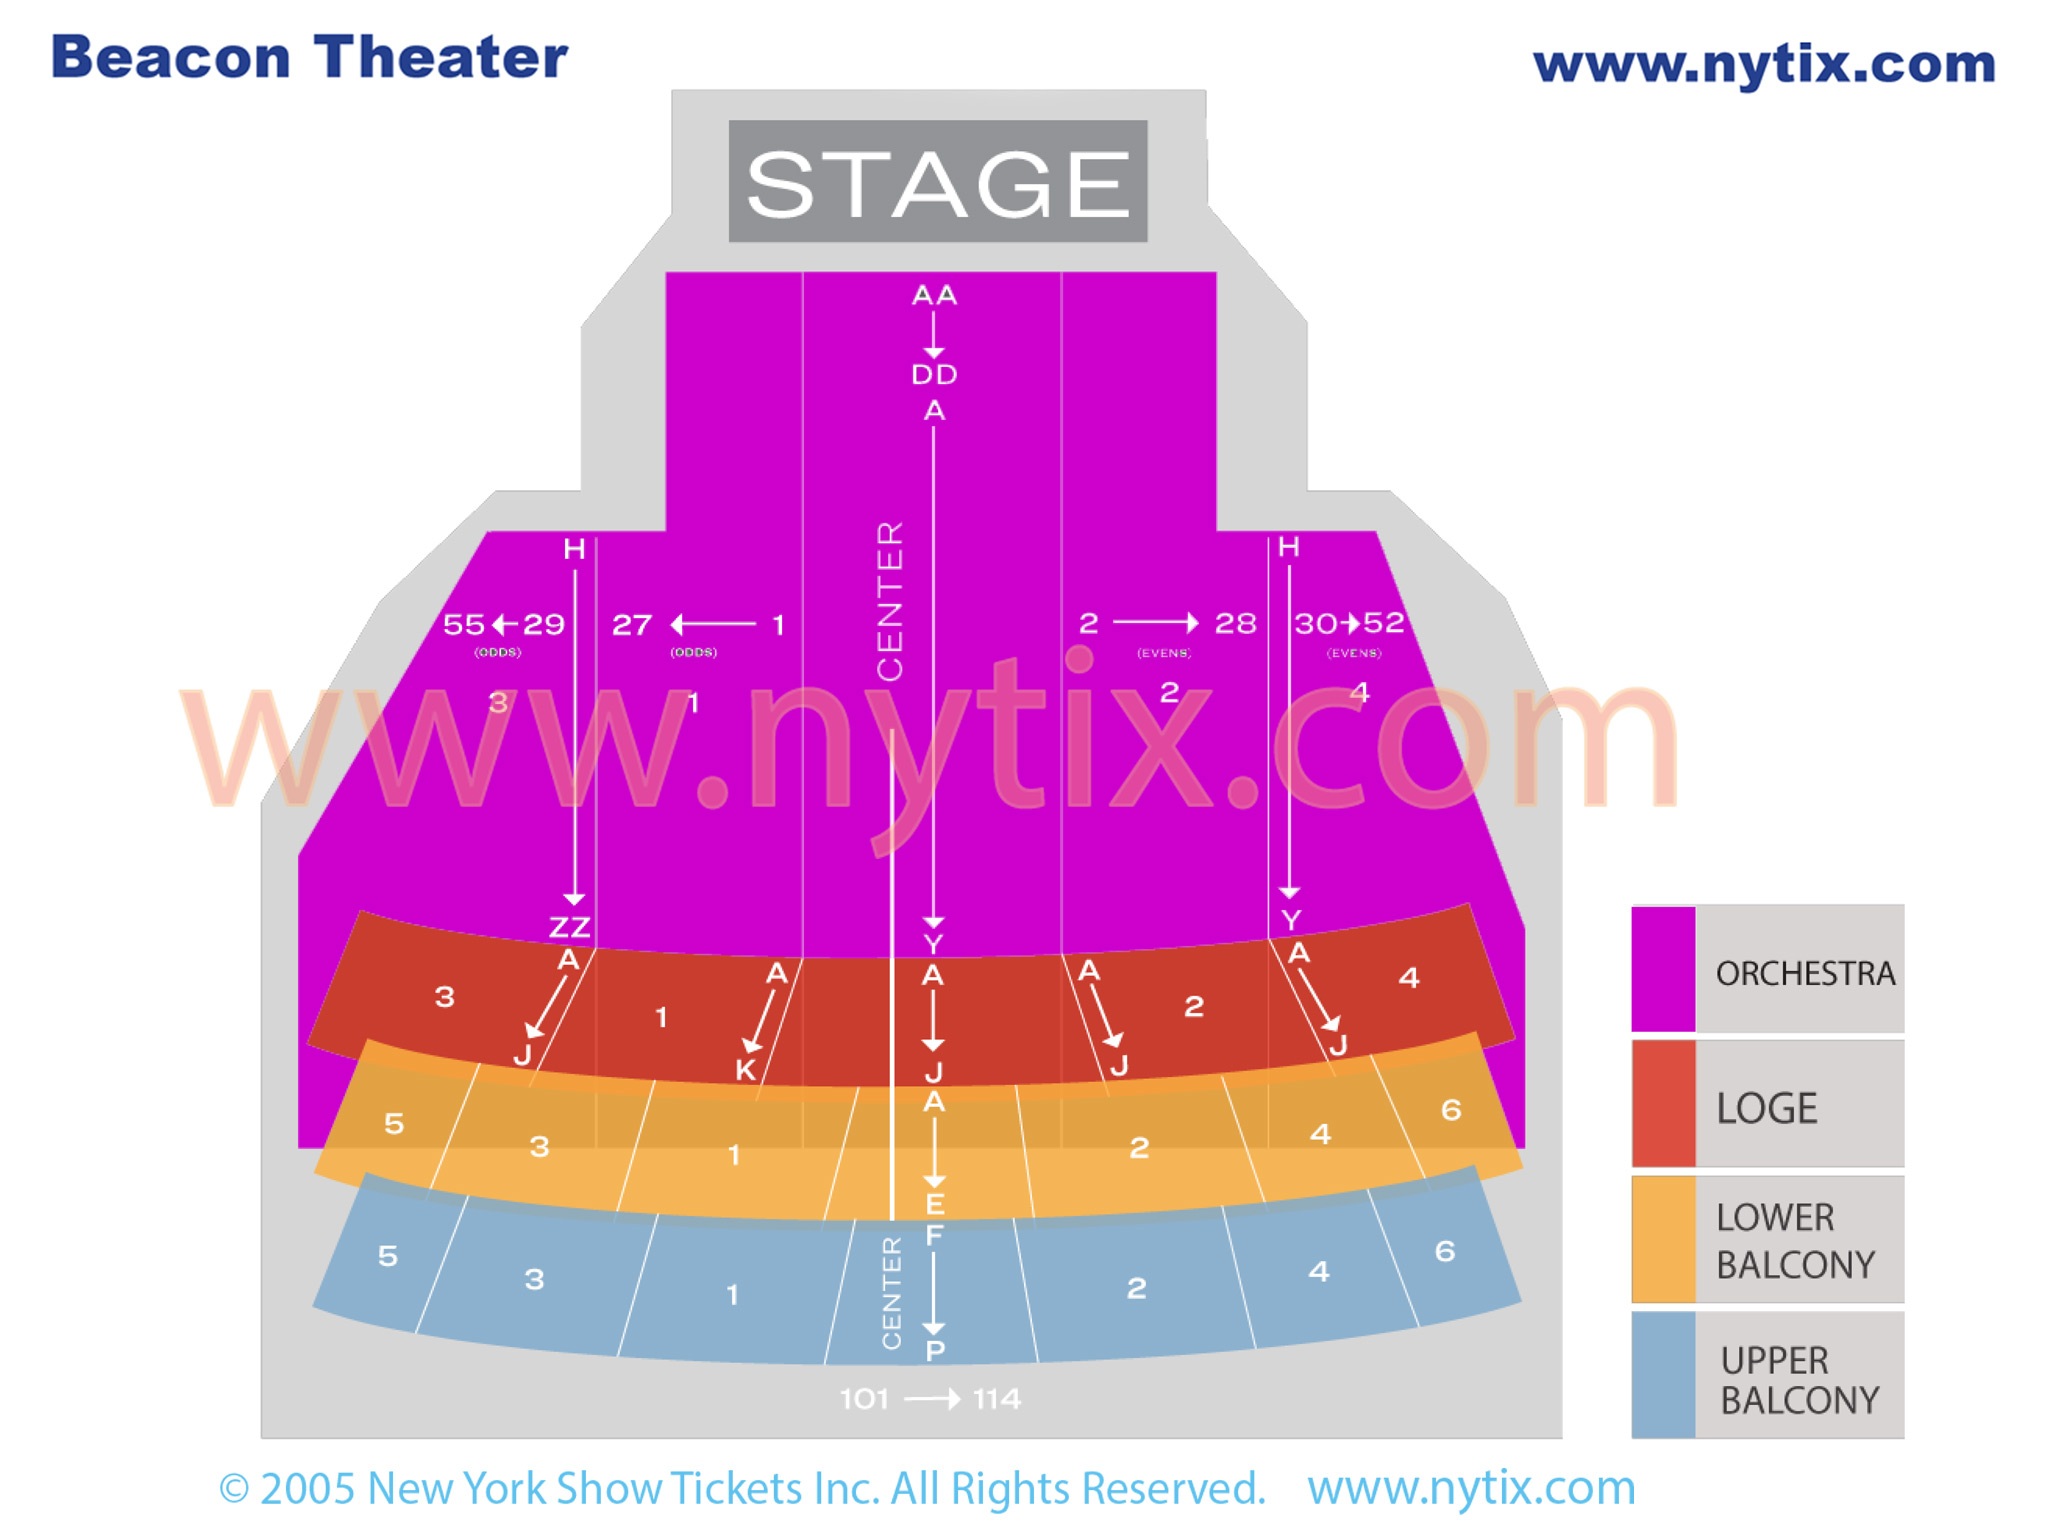 Beacon Broadway Theatre Seating Chart